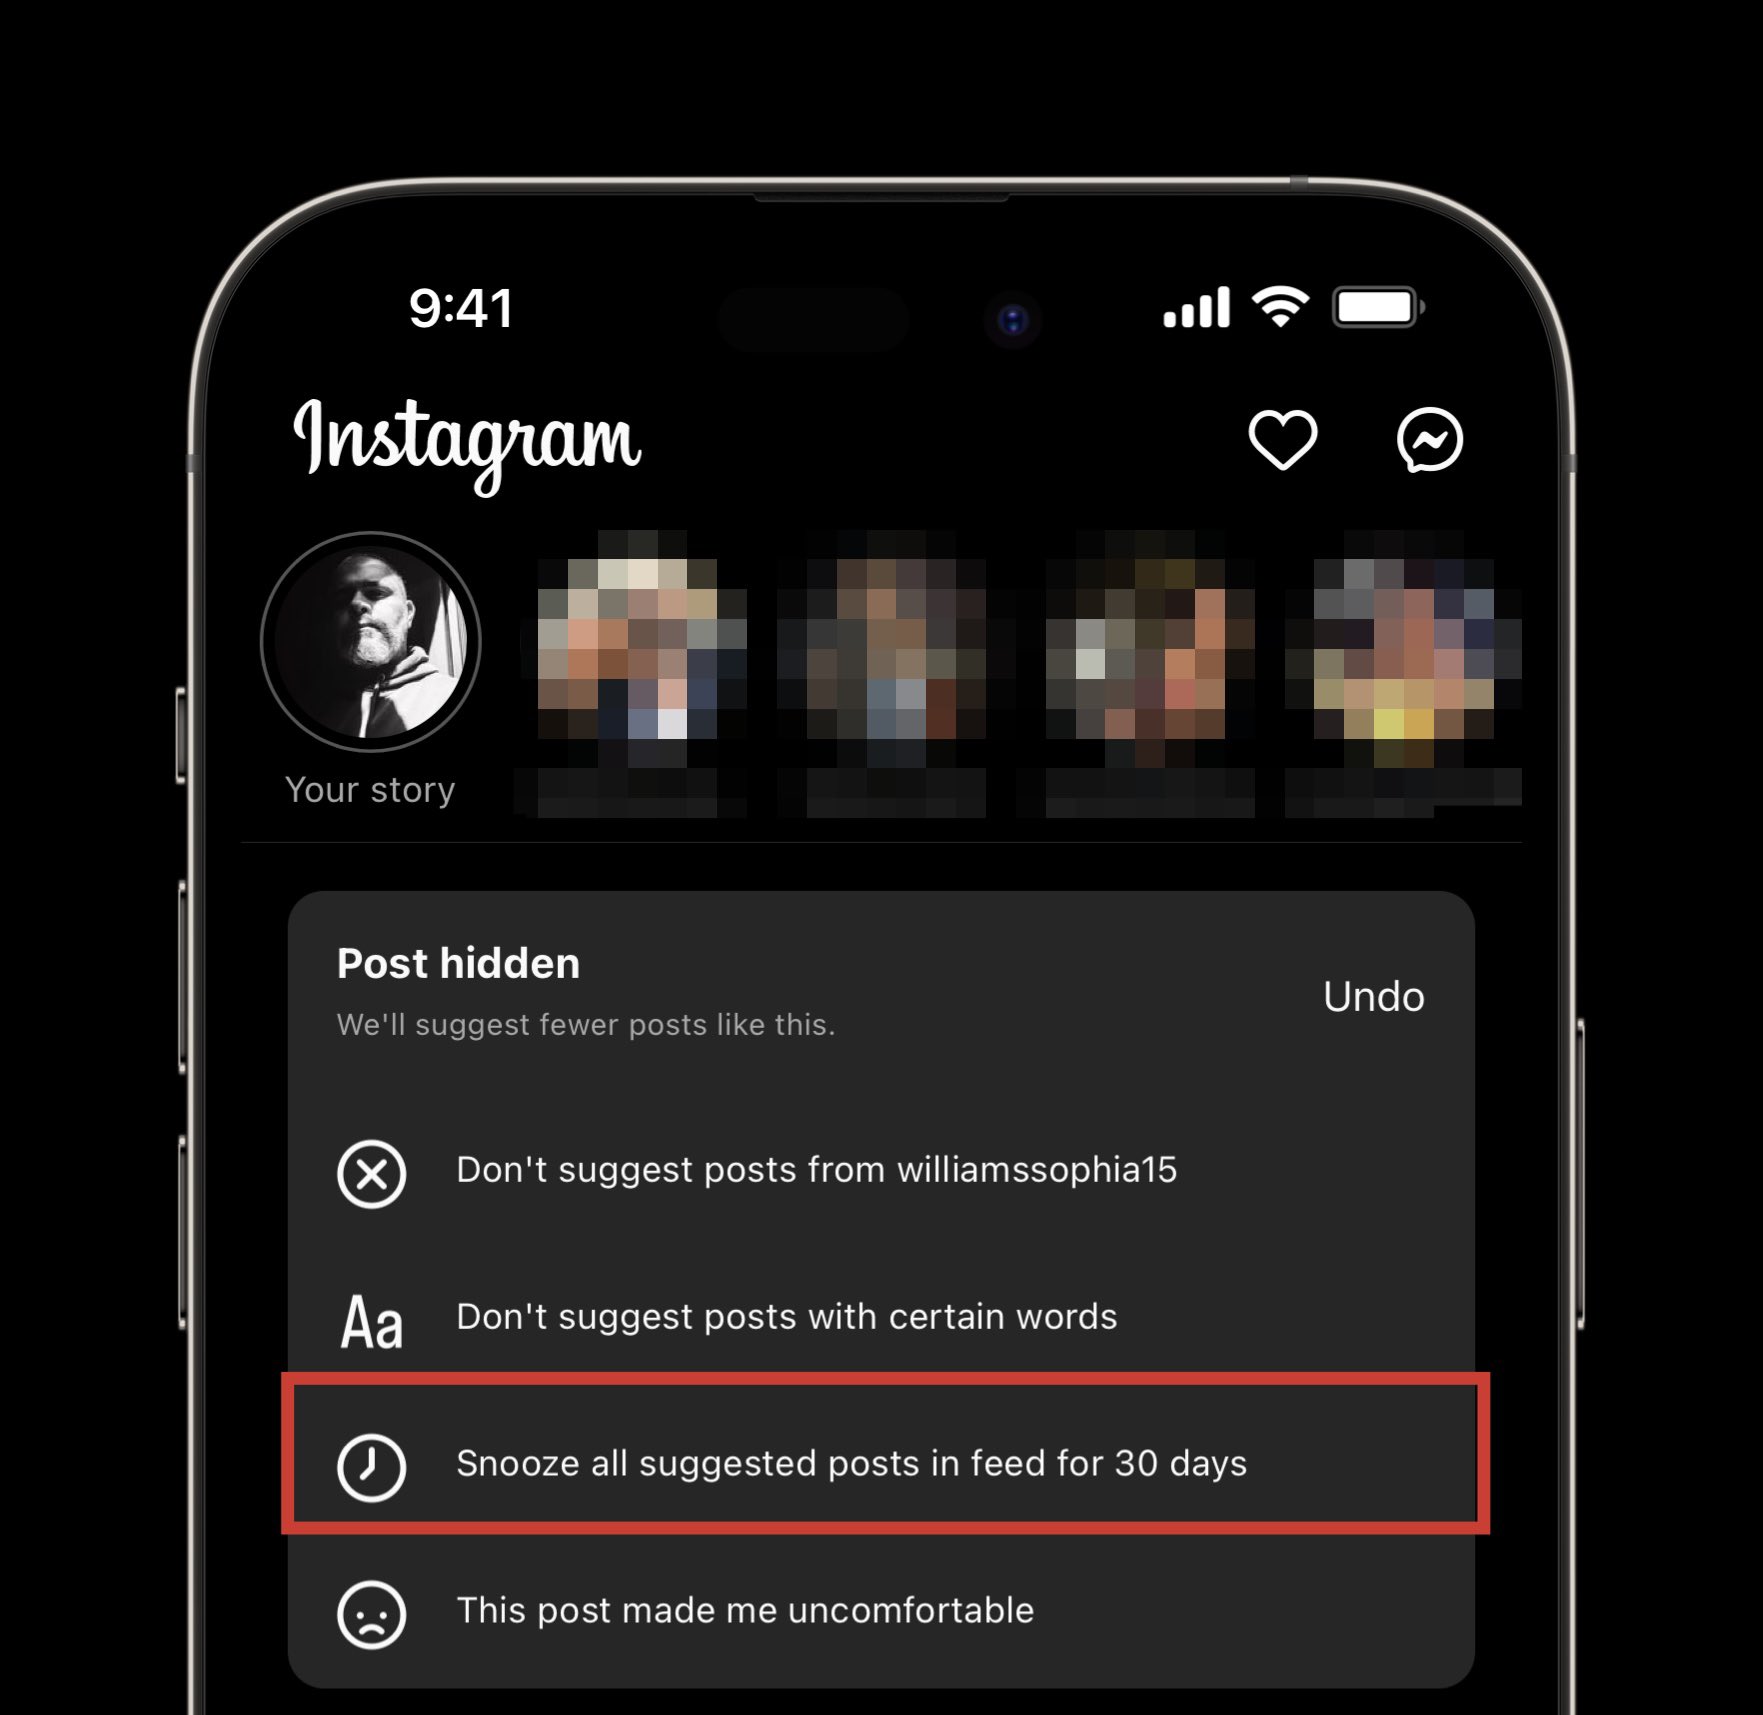 Instagram Adds New Option That Snoozes All Suggested Posts For One